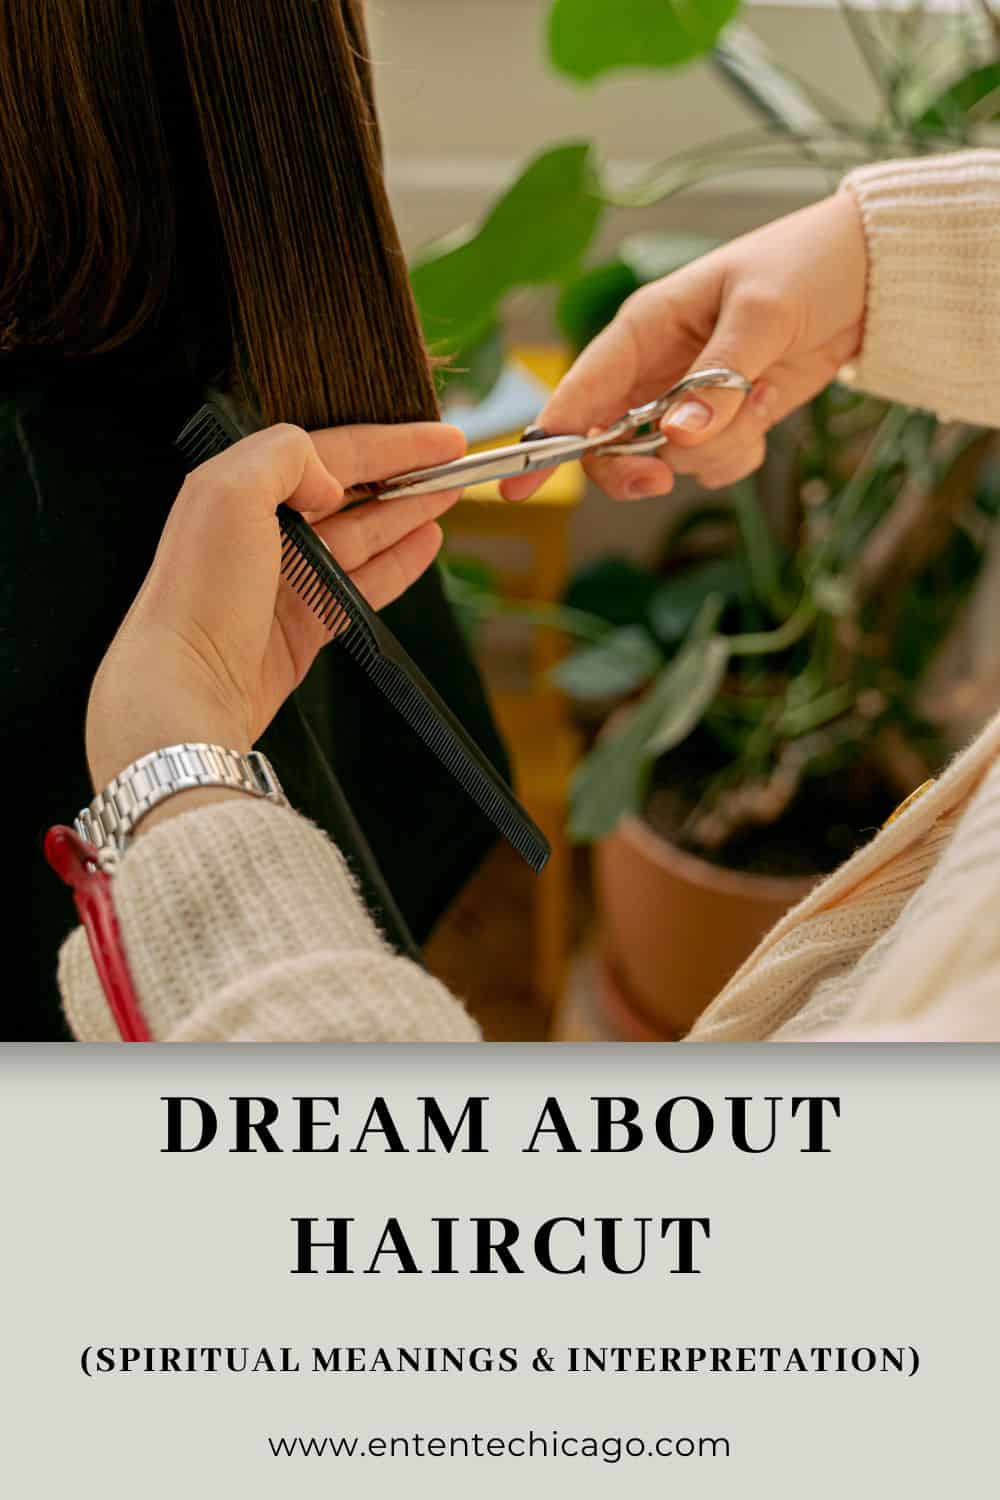 Dreaming about Haircut - Typical Meaning